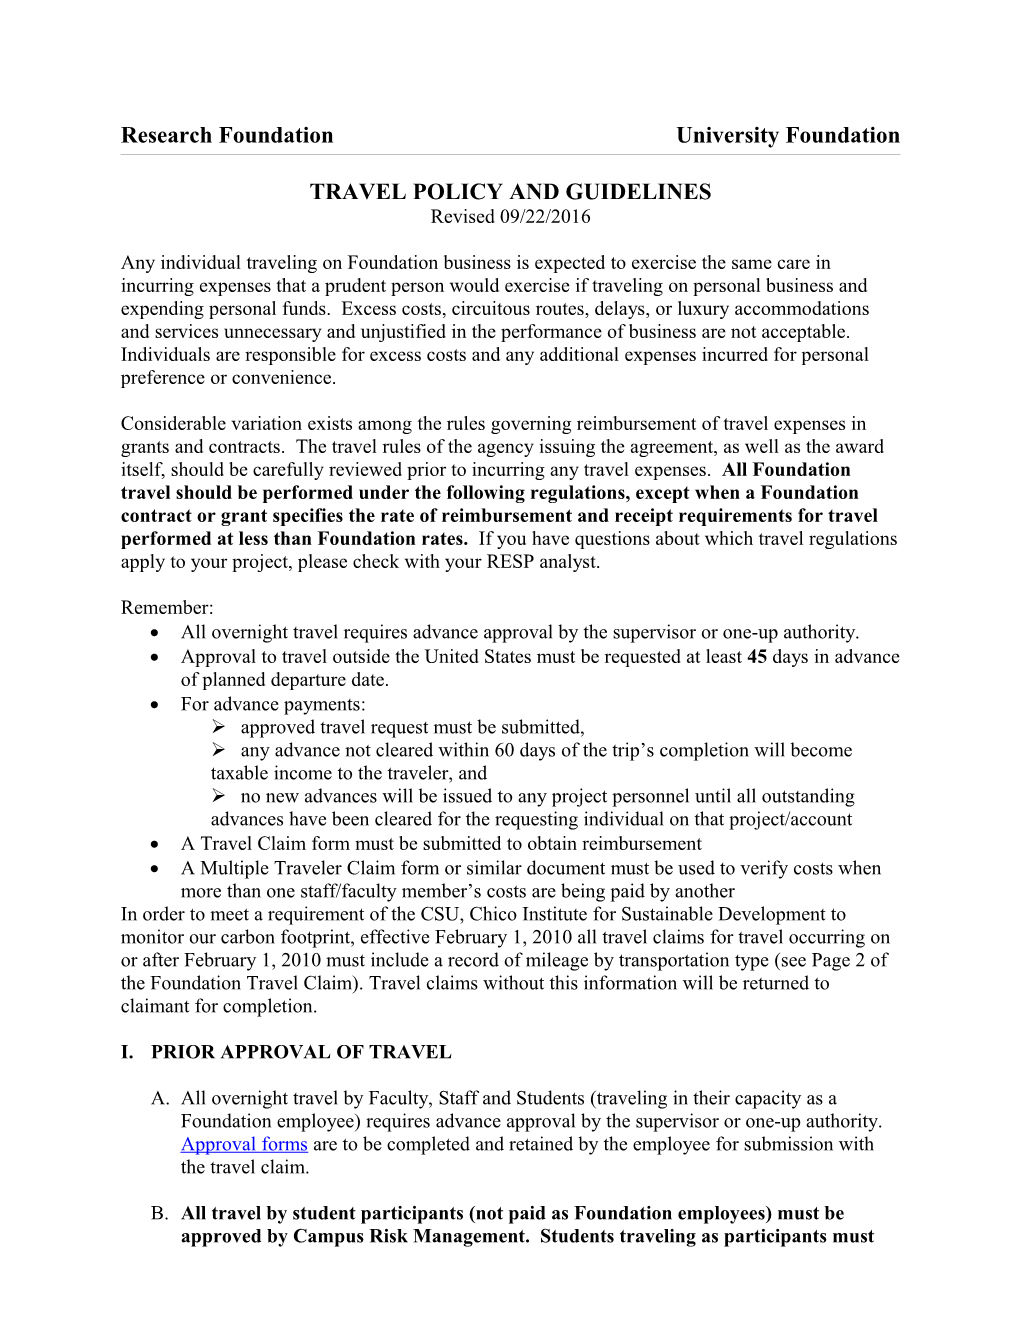 Travel Policy and Regulations